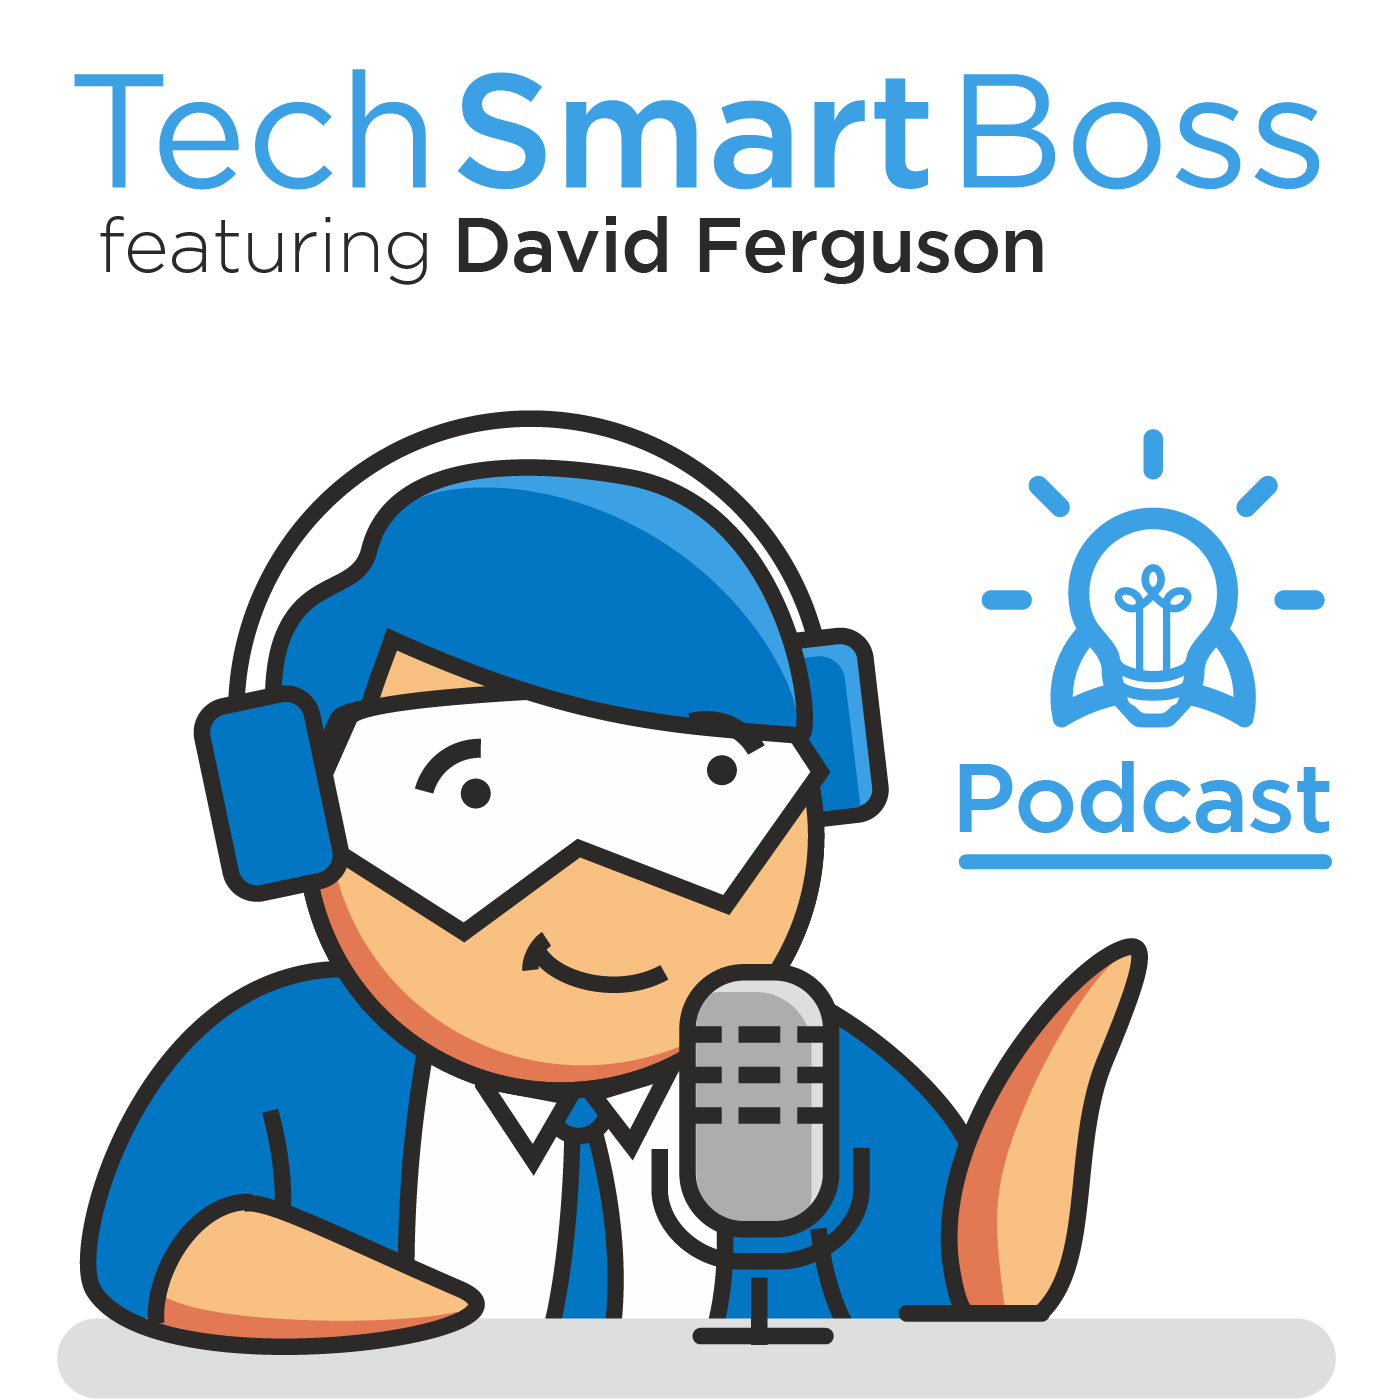 Episode 123: How To Use Scrum and Agile Methodology For Non Tech Projects (The Tech Smart Boss Way)